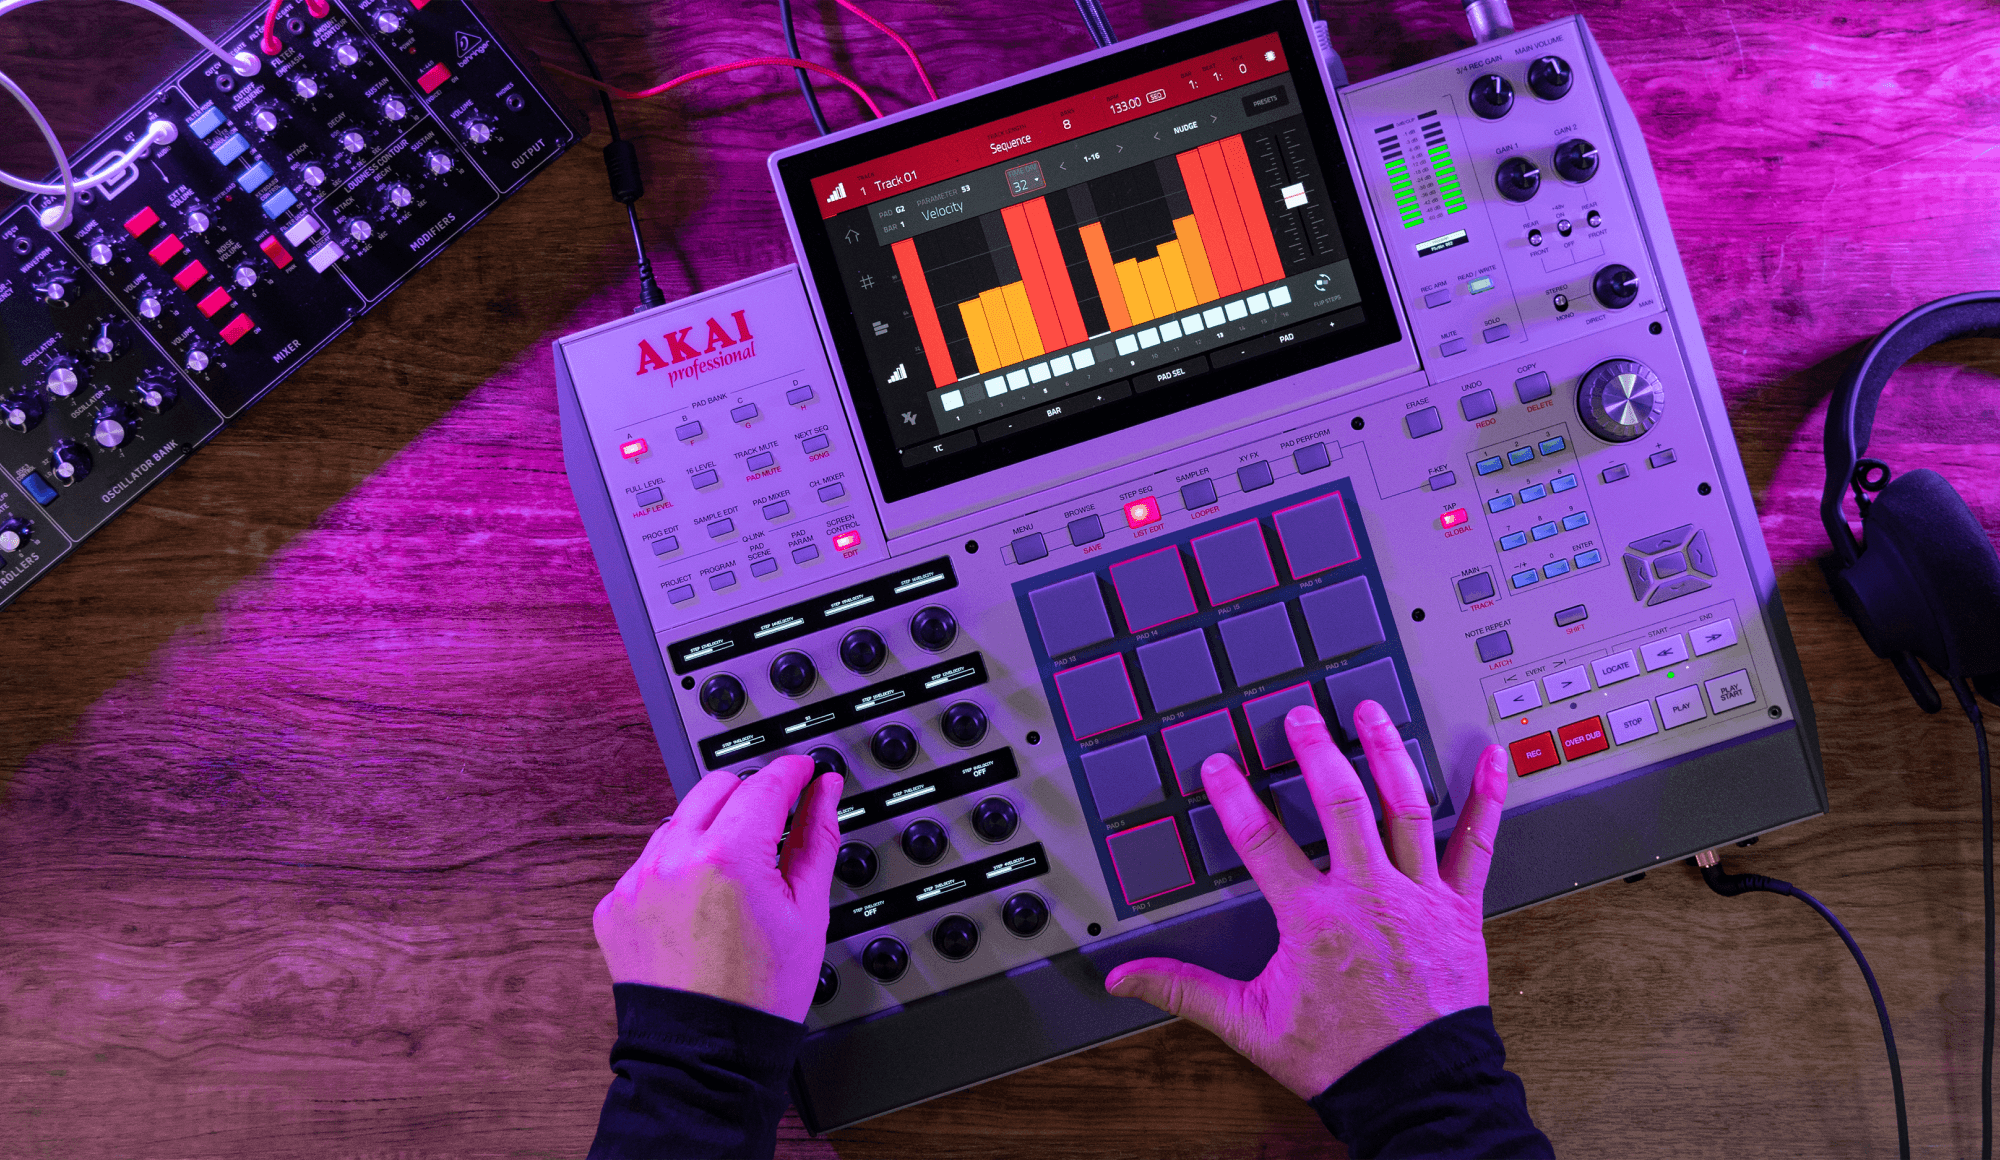 webimage view of MPC X Special Edition